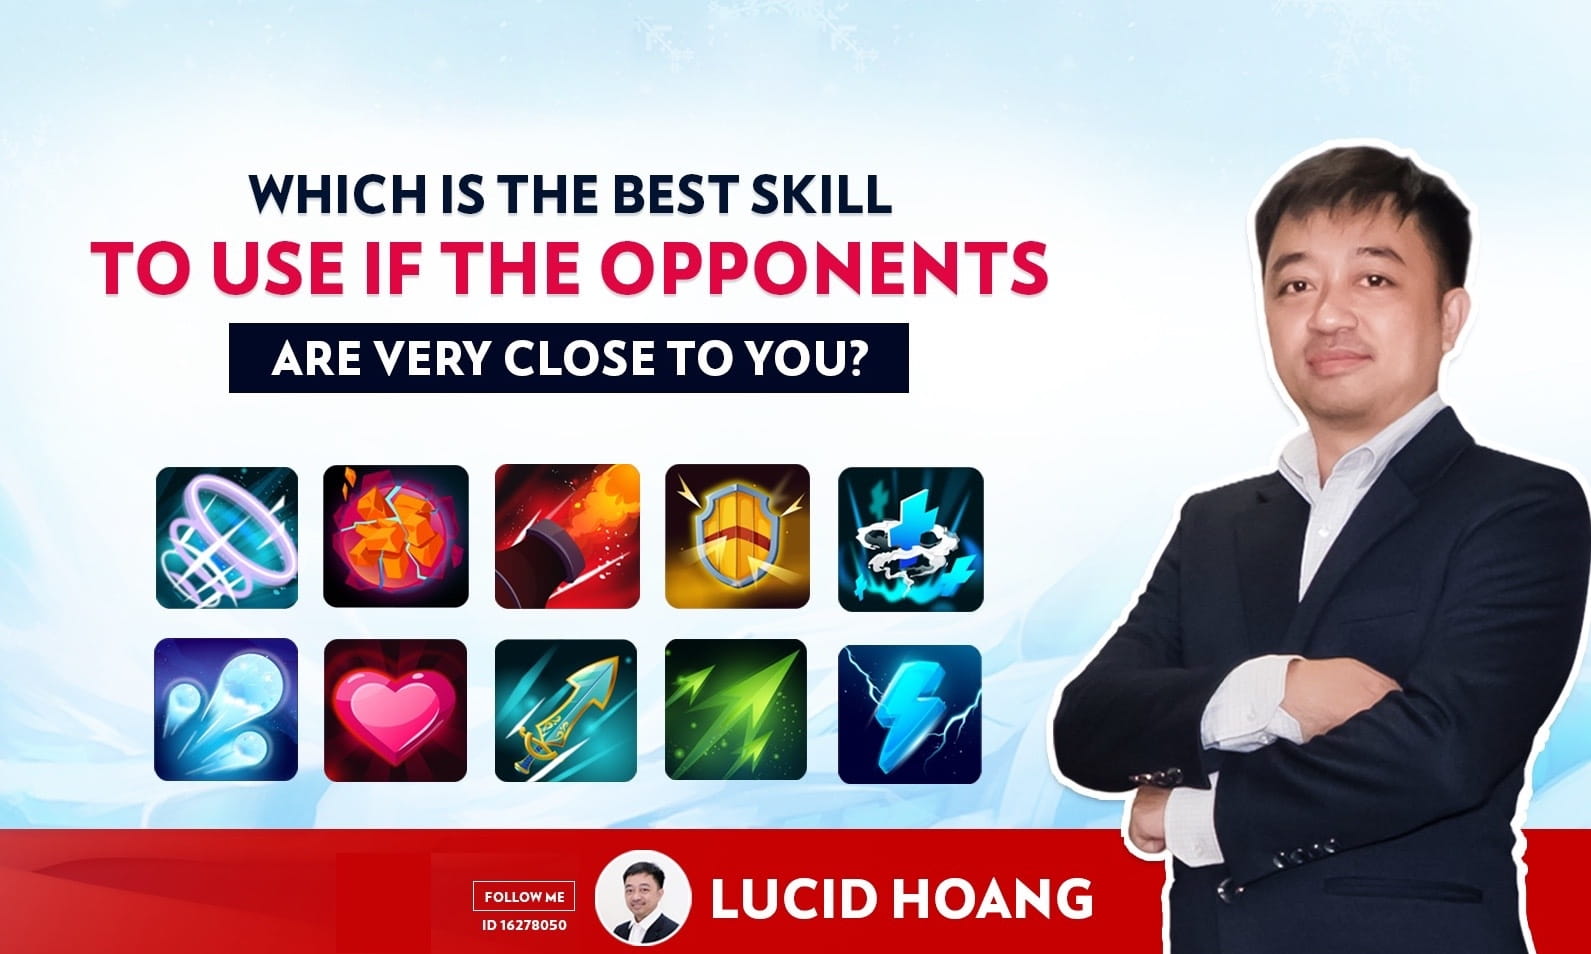 WHICH IS THE BEST SKILL TO USE IF THE OPPONENTS ARE VERY CLOSE TO YOU?